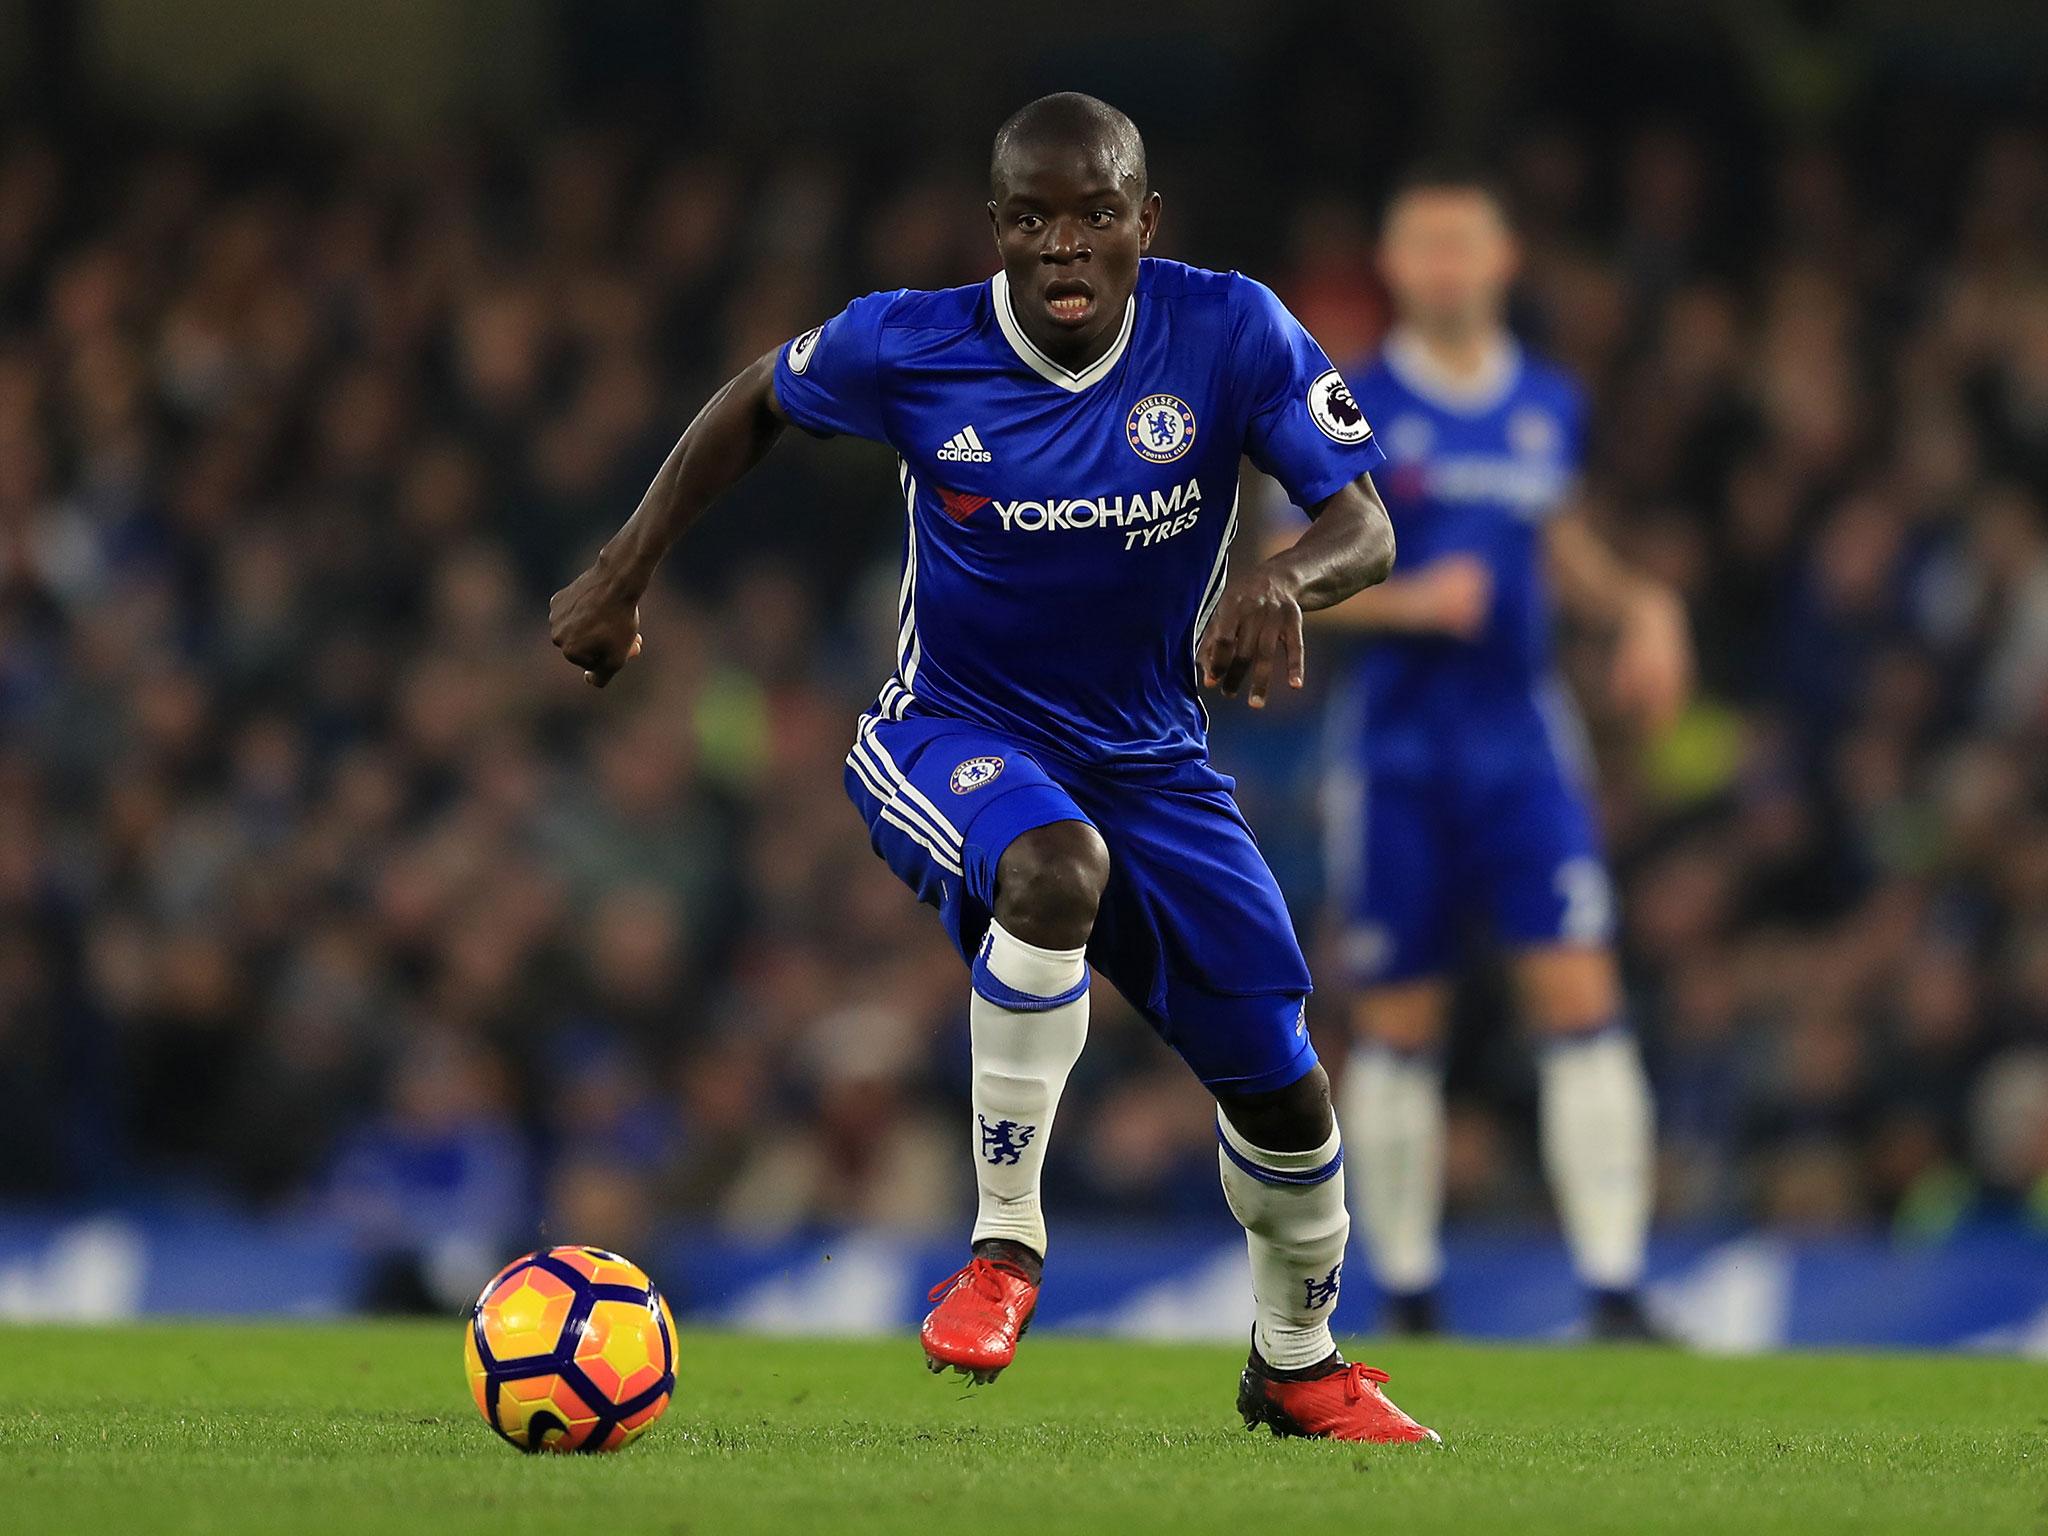 Arsene Wenger tried and failed to sign N'Golo Kante last summer